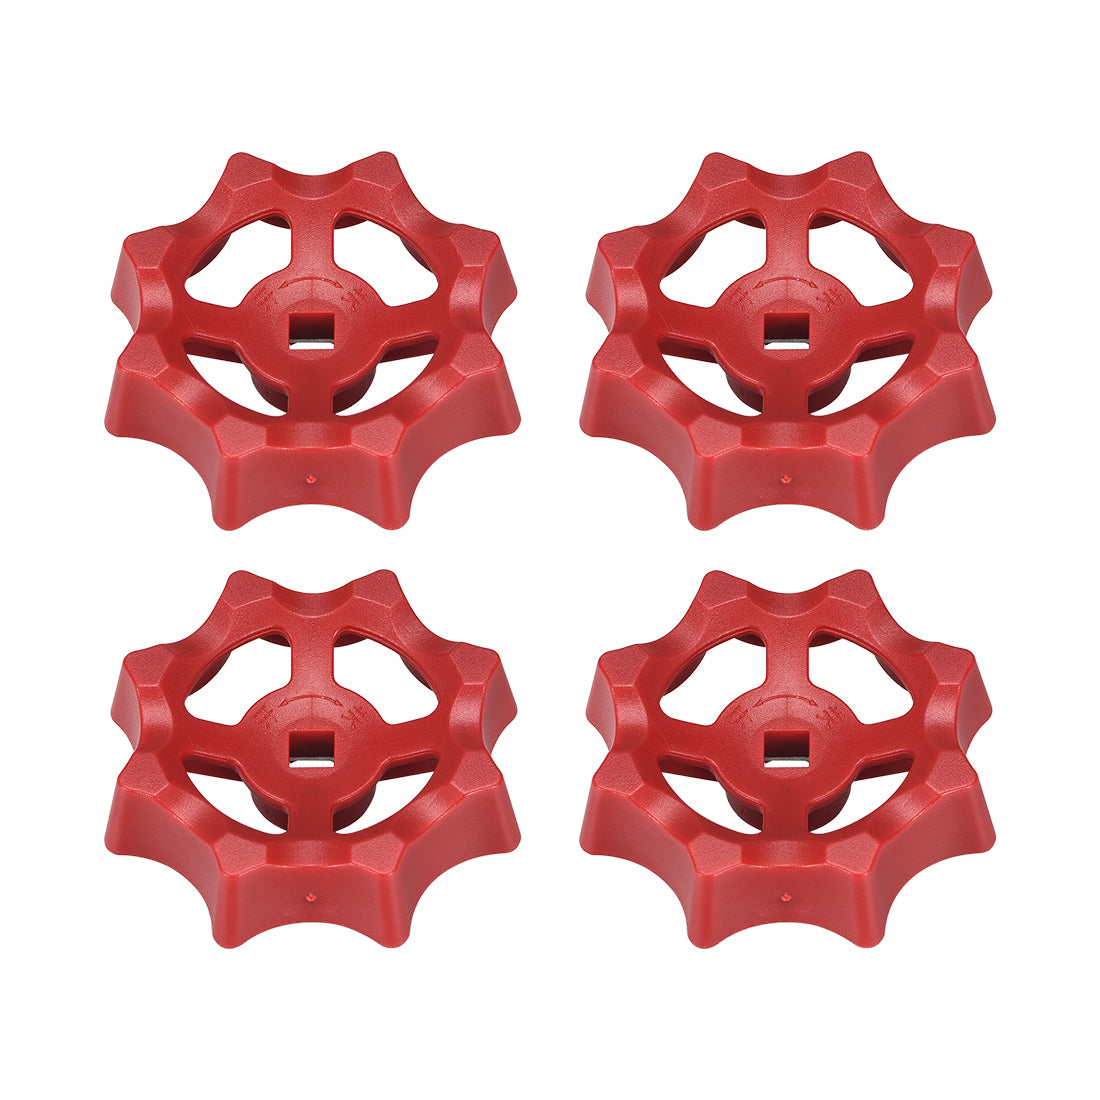 Uxcell Uxcell Round Wheel Handle, Square Broach 7x7mm, Wheel OD 70mm ABS Red 4Pcs